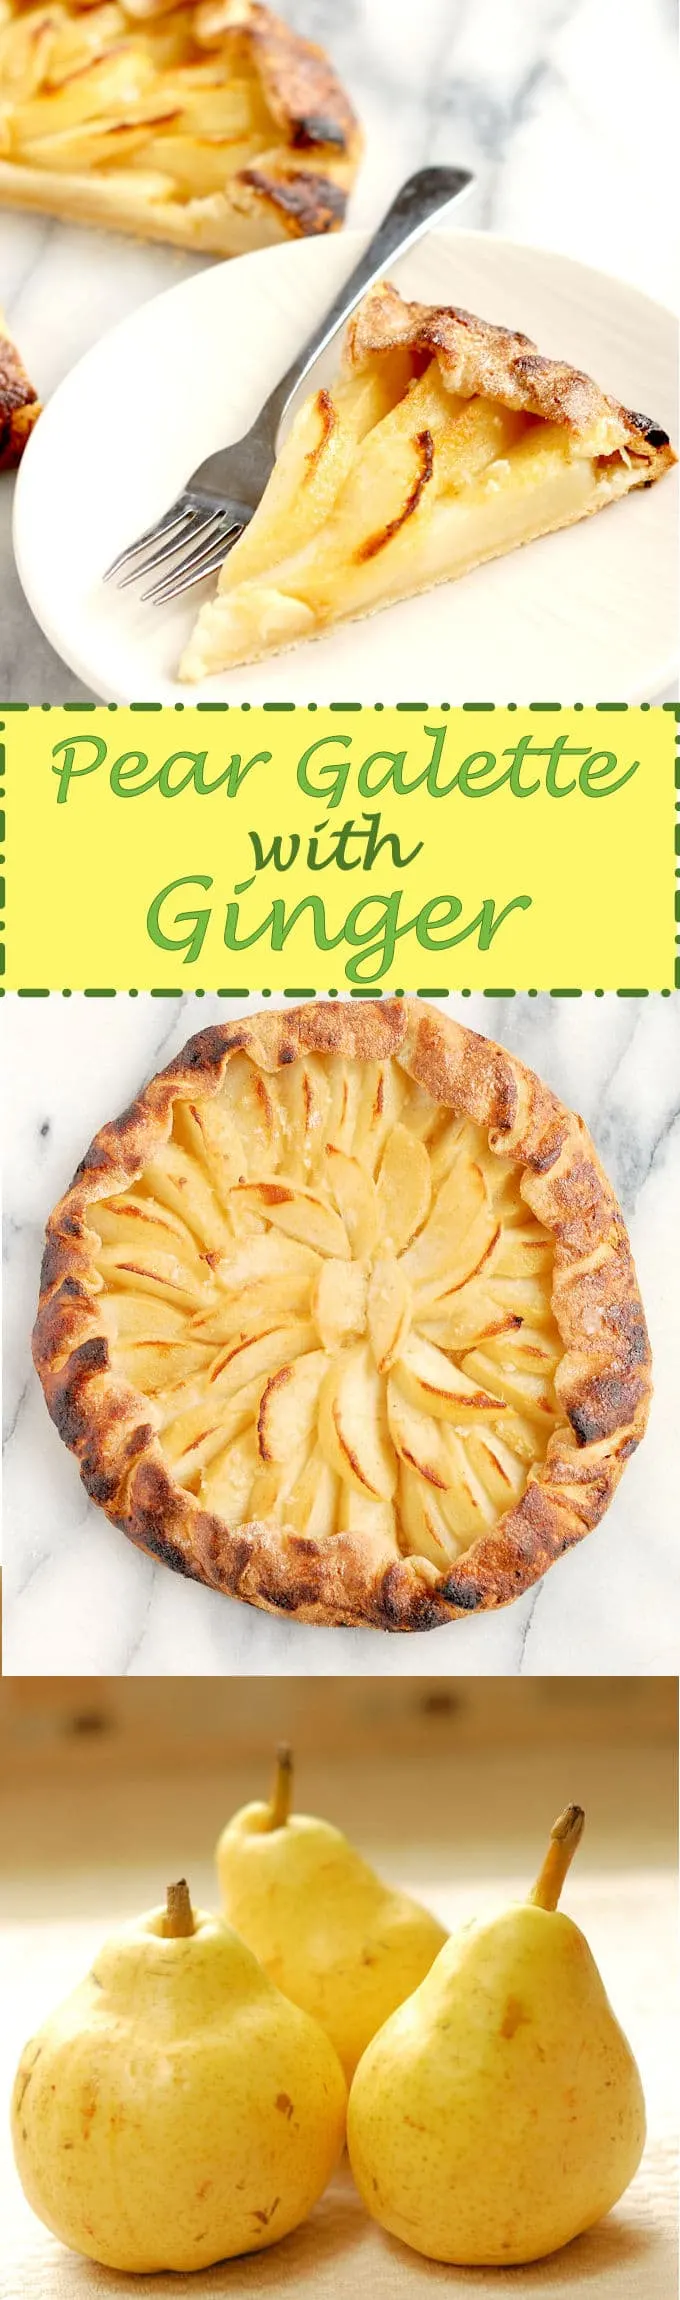 Simple to make yet so tasty with a hint of ginger.